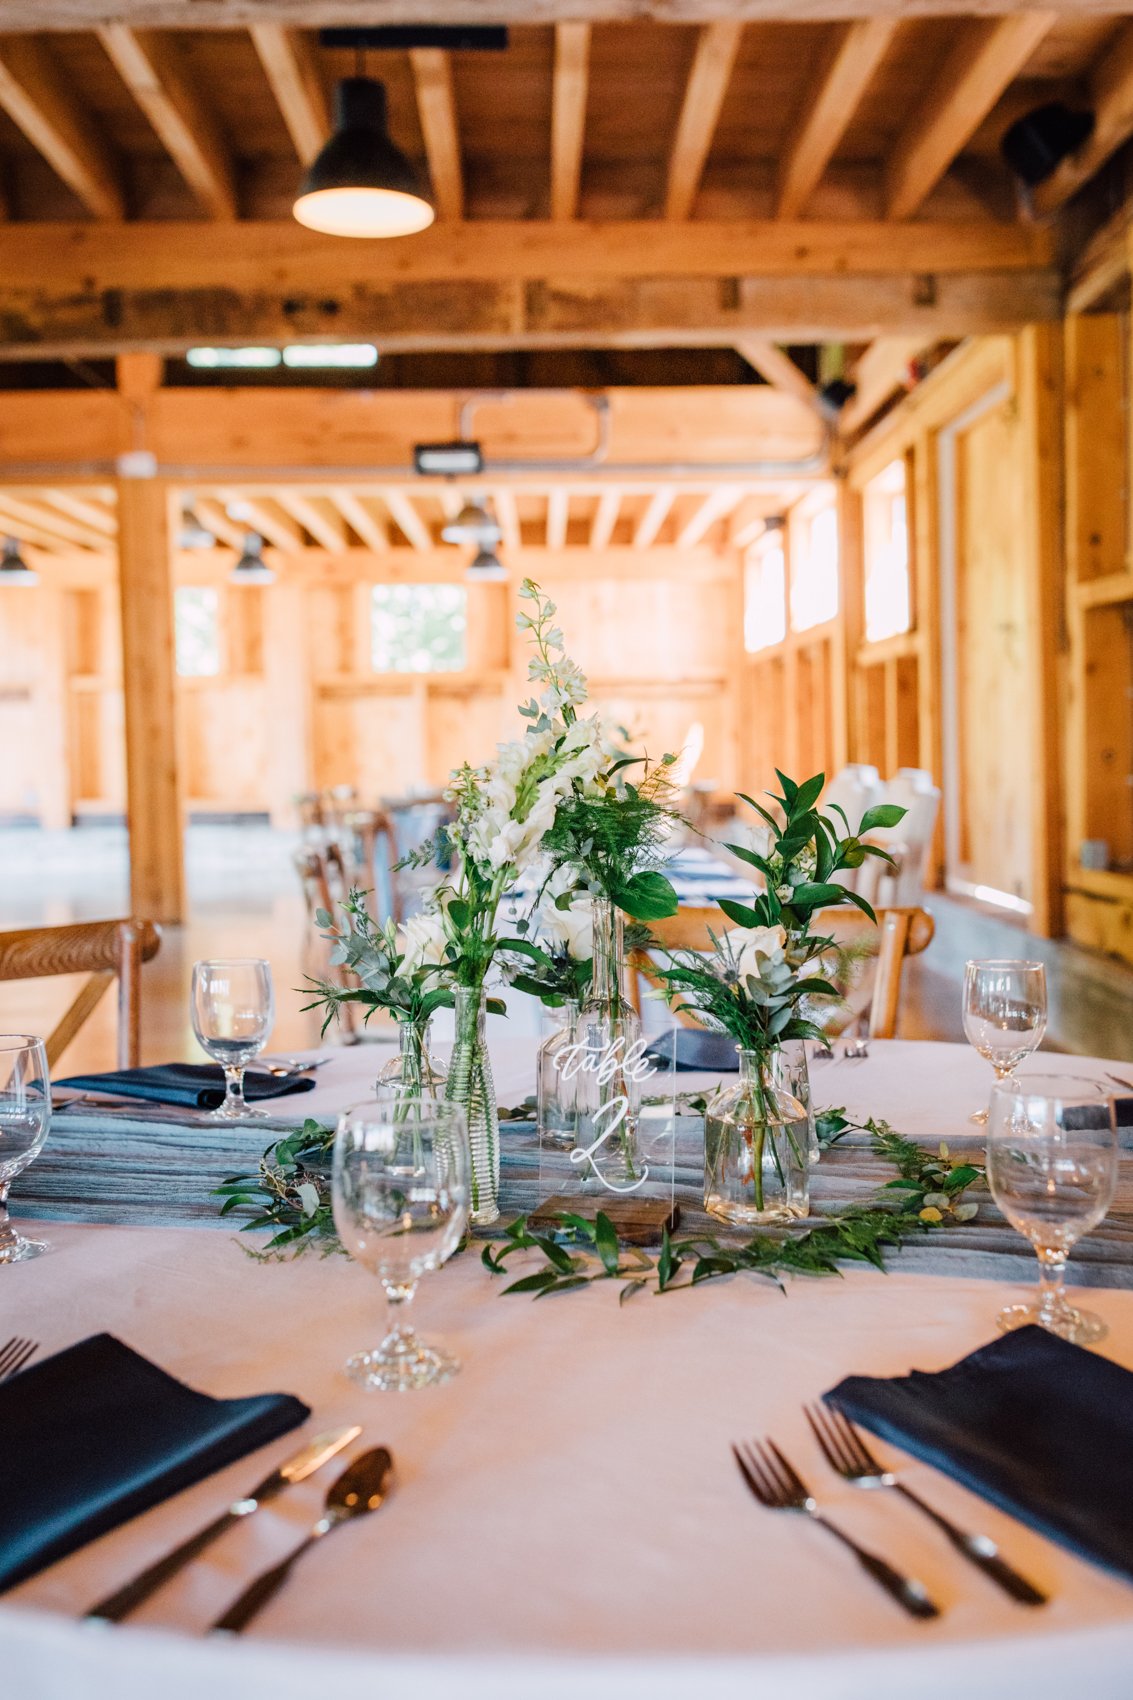  Simple wedding centerpieces with wildflowers and greenery in mismatched clear glass vases 